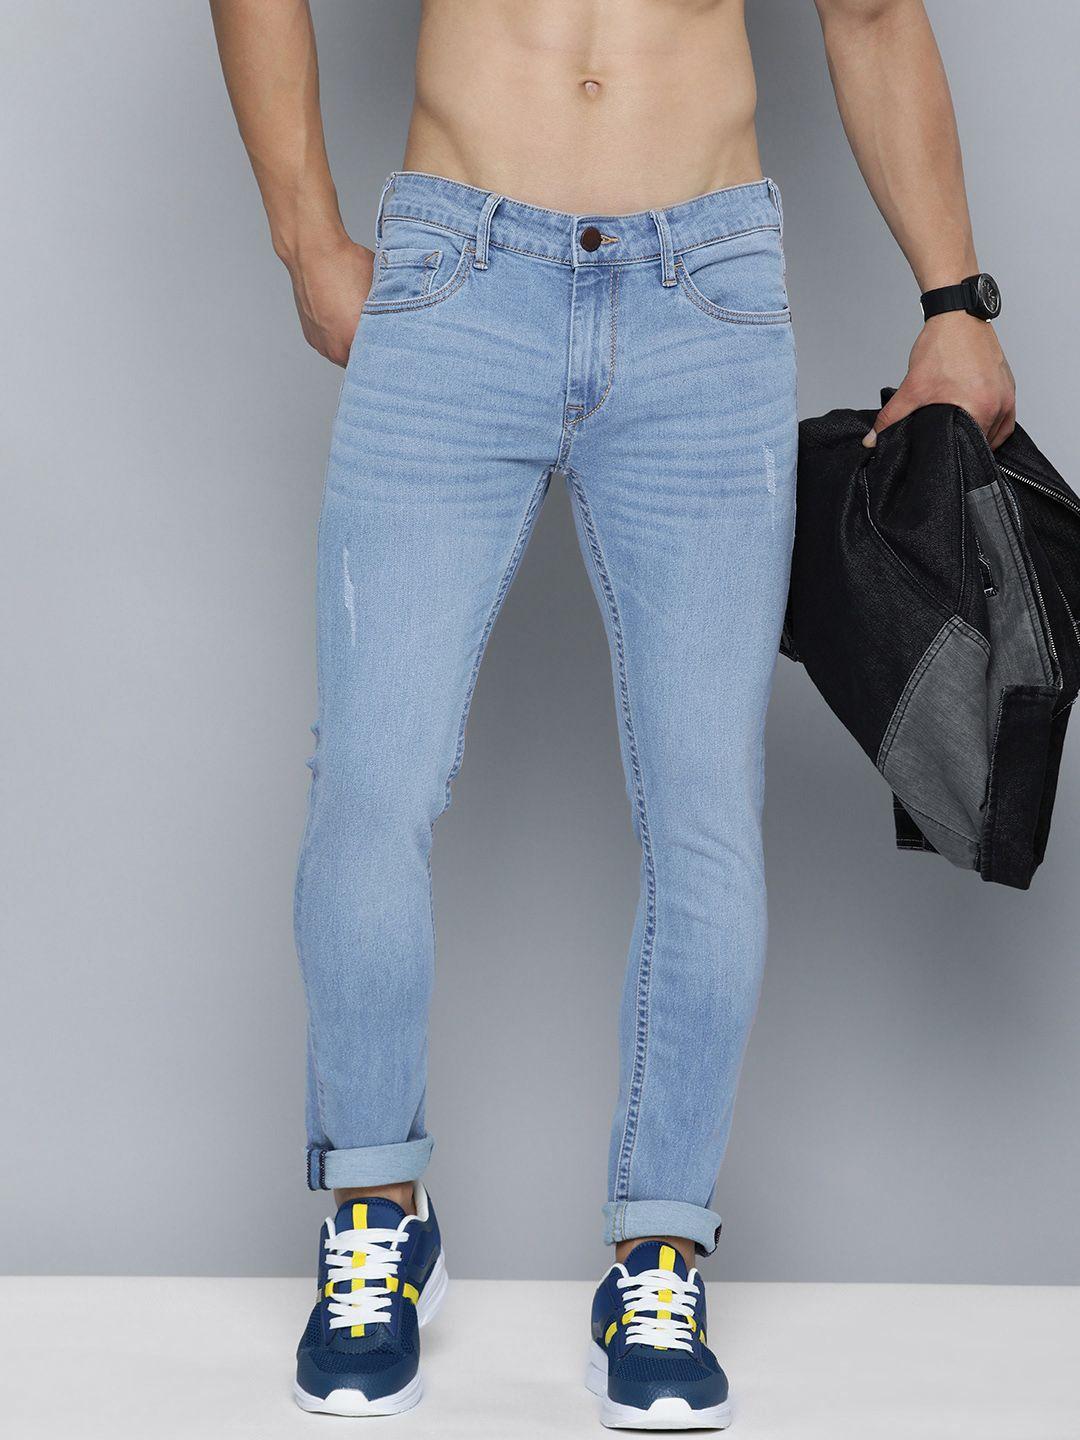 here&now-men-skinny-fit-light-fade-stretchable-mid-rise-jeans